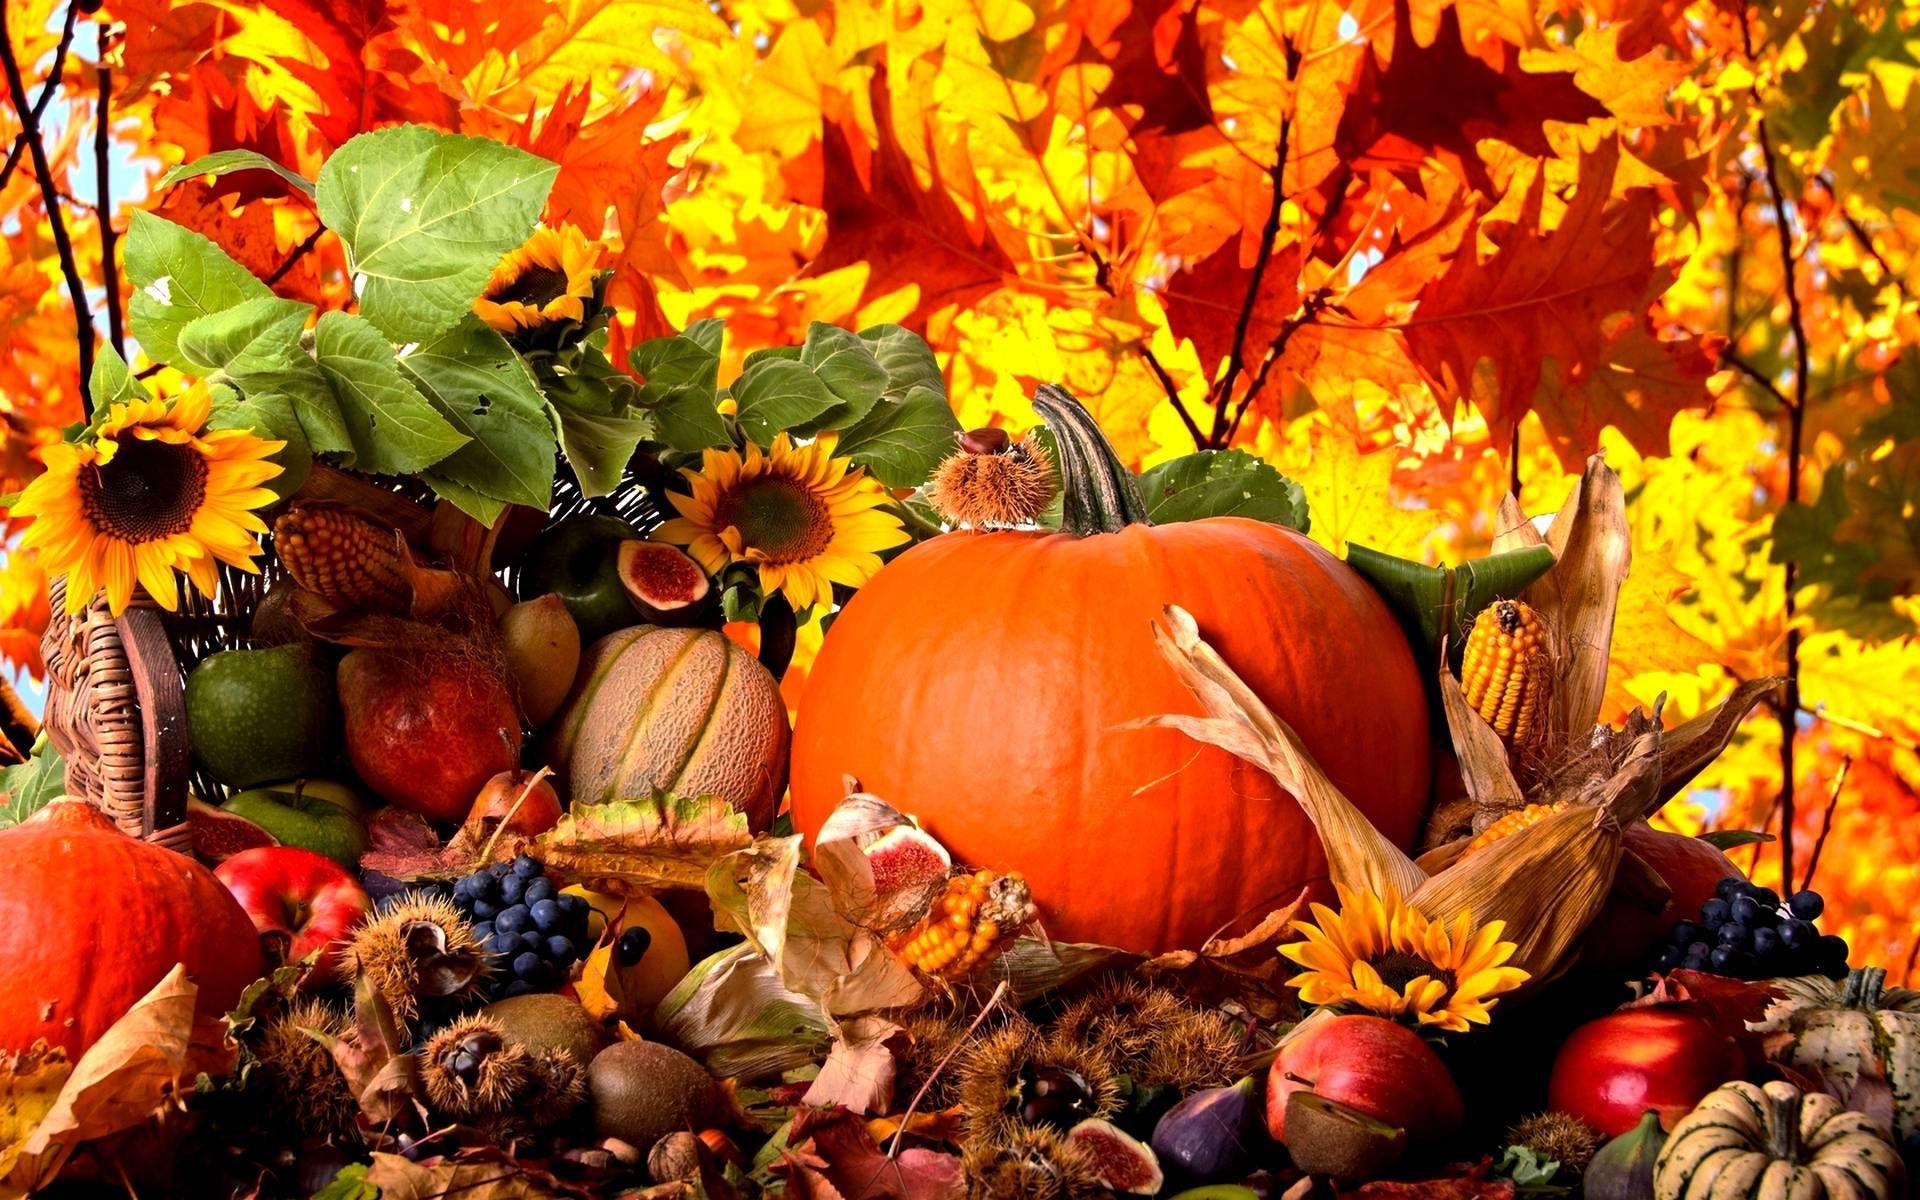 Download Fall Harvest Wallpaper High Quality for iphone, pc